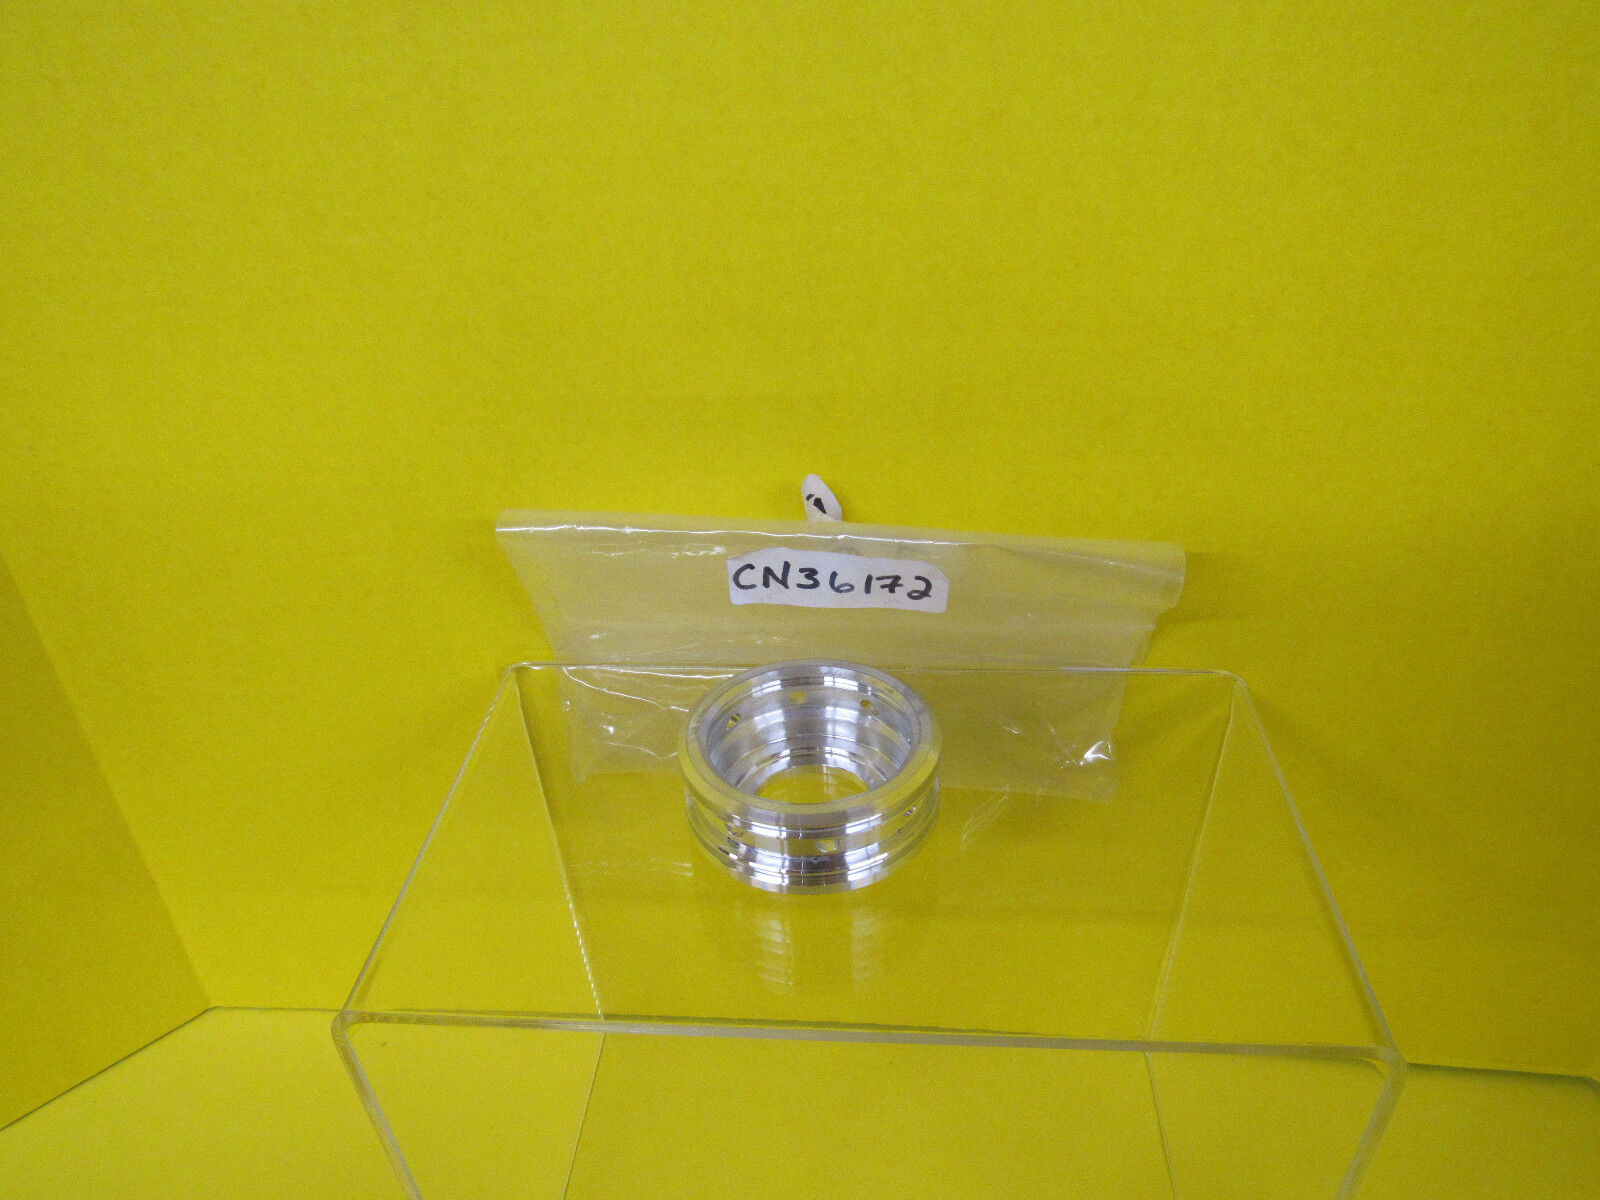 MAX CN36172 Piston Head Valve for CN100 Free shipping / New ~ Nail New Coil Gun High quality new